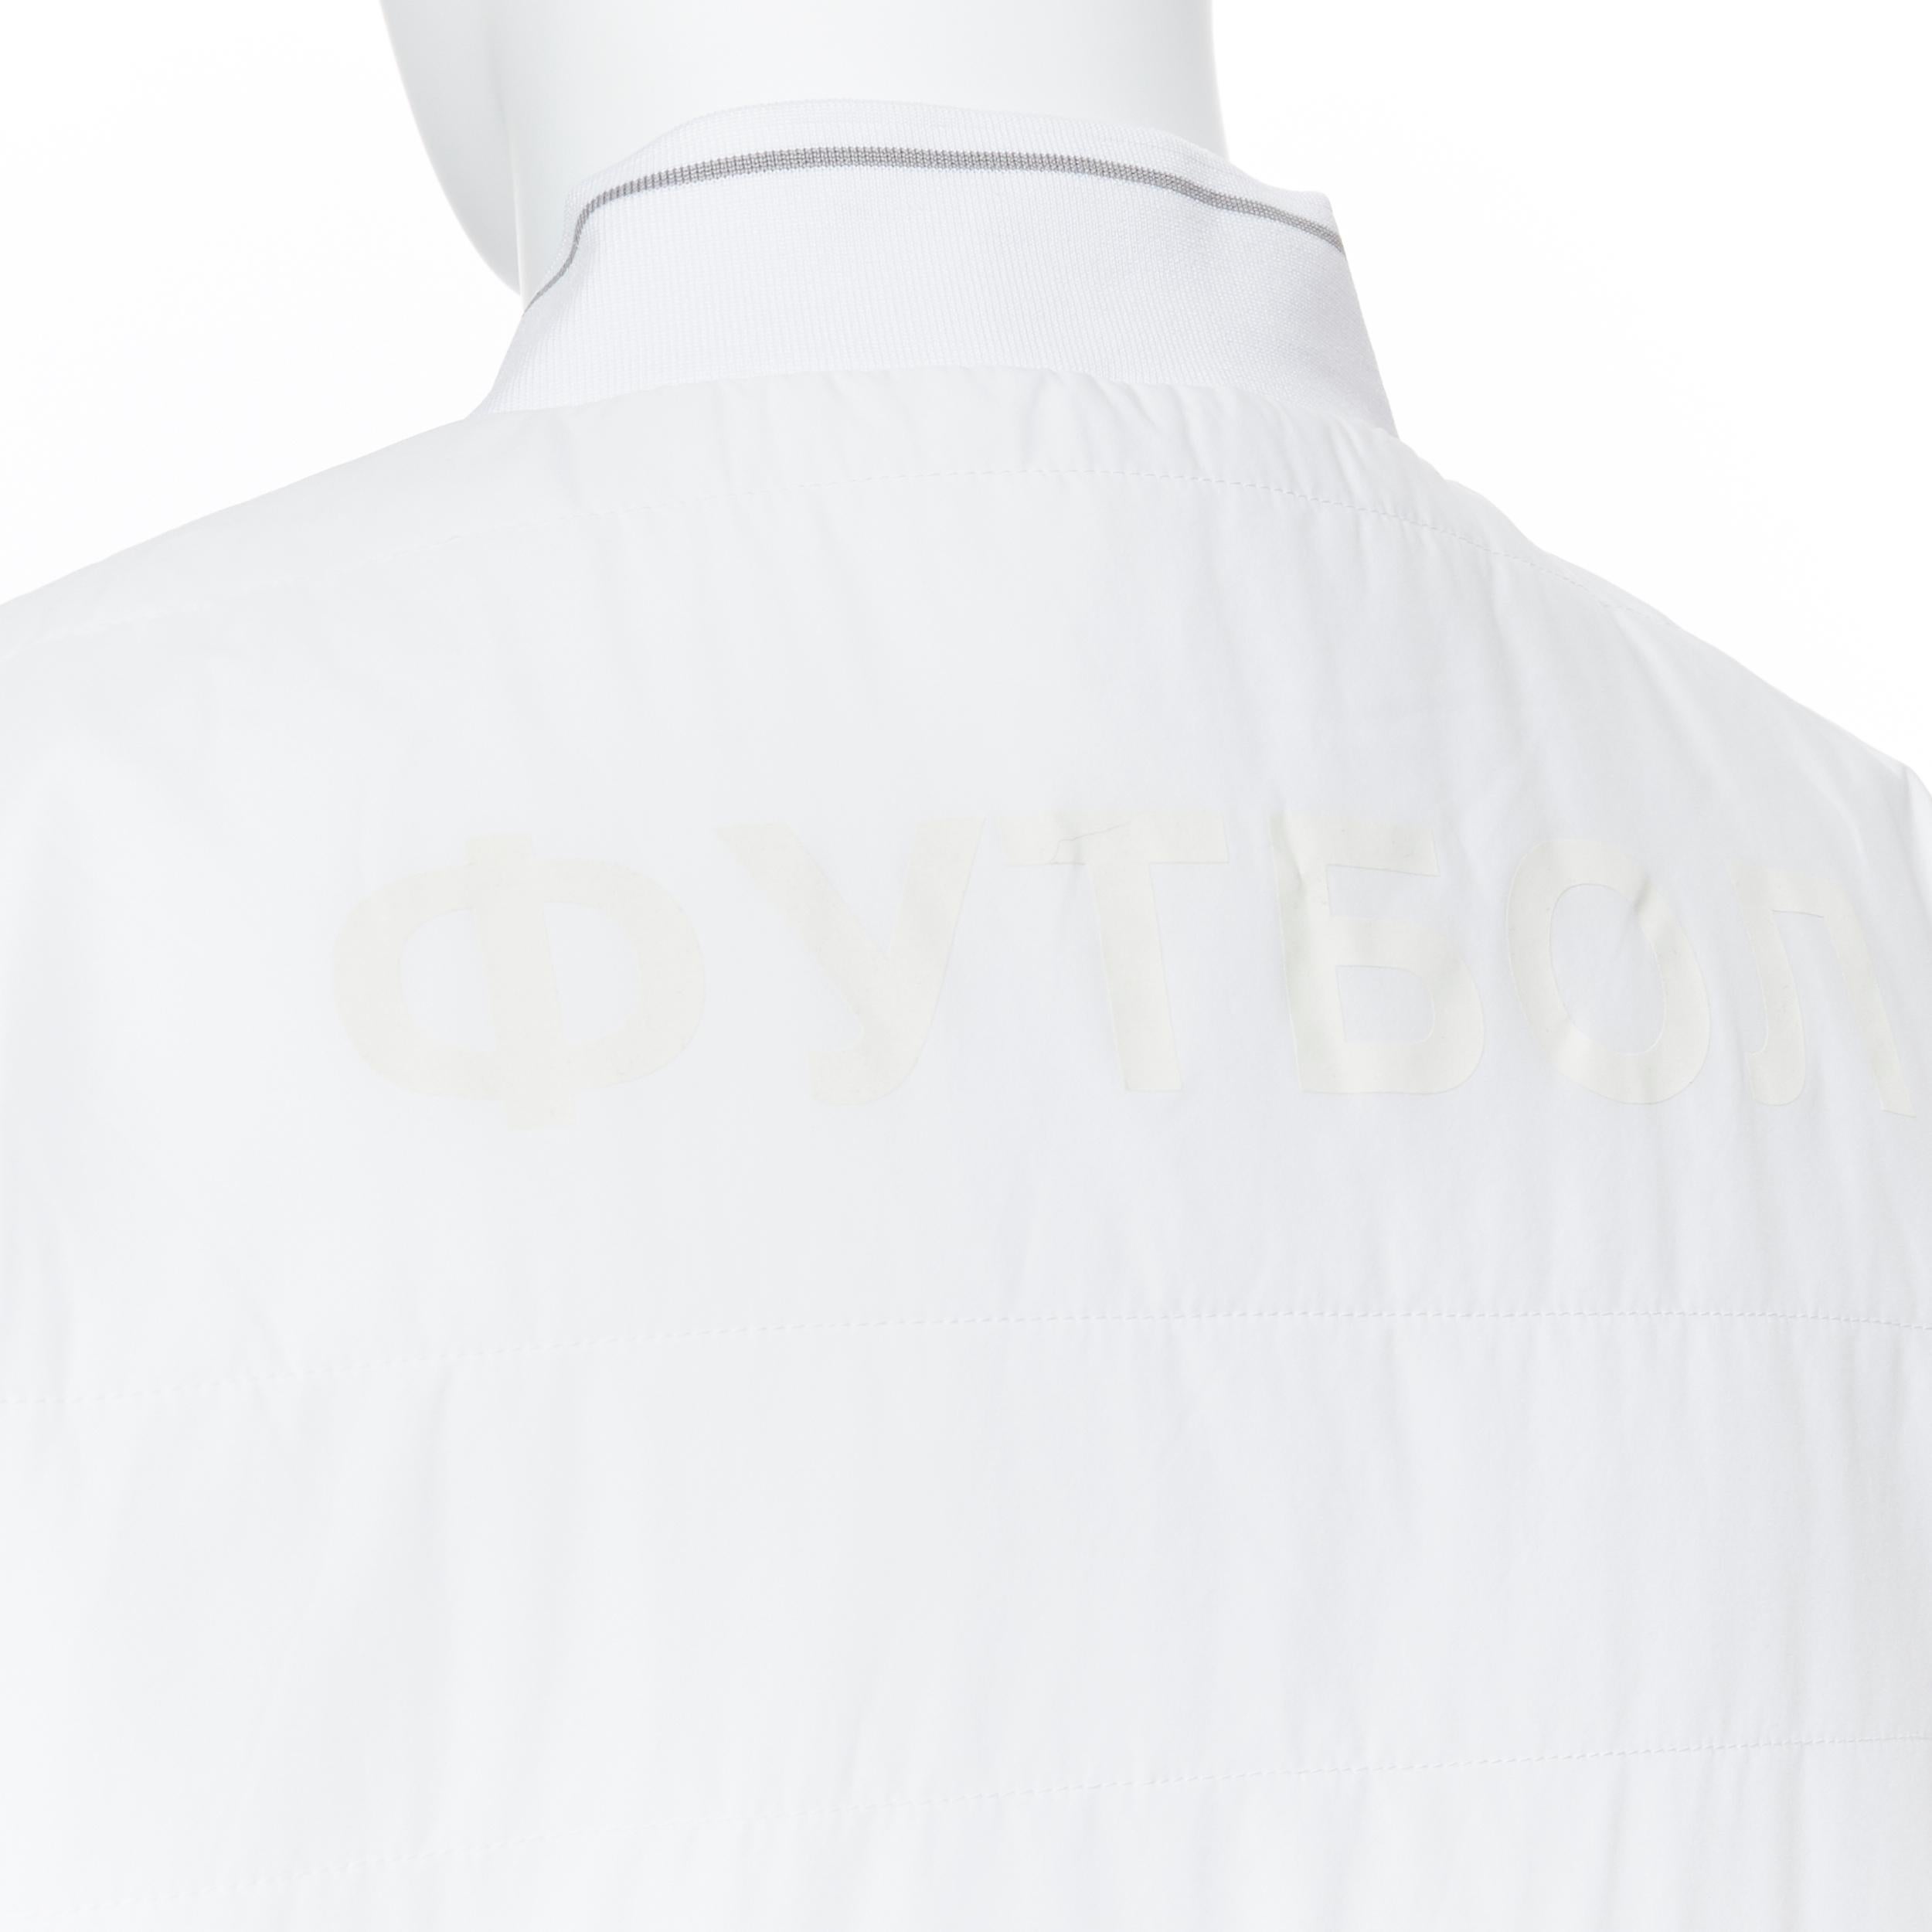 GOSHA RUBCHINSKIY ADIDAS white quilted padded long sleeve sweater pullover S
Brand: Adidas
Designer: Gosha Rubchinskiy
Model Name / Style: Pullover
Material: Polyester
Color: White
Pattern: Solid
Extra Detail: Long sleeve. V-neck neckline.
Made in: